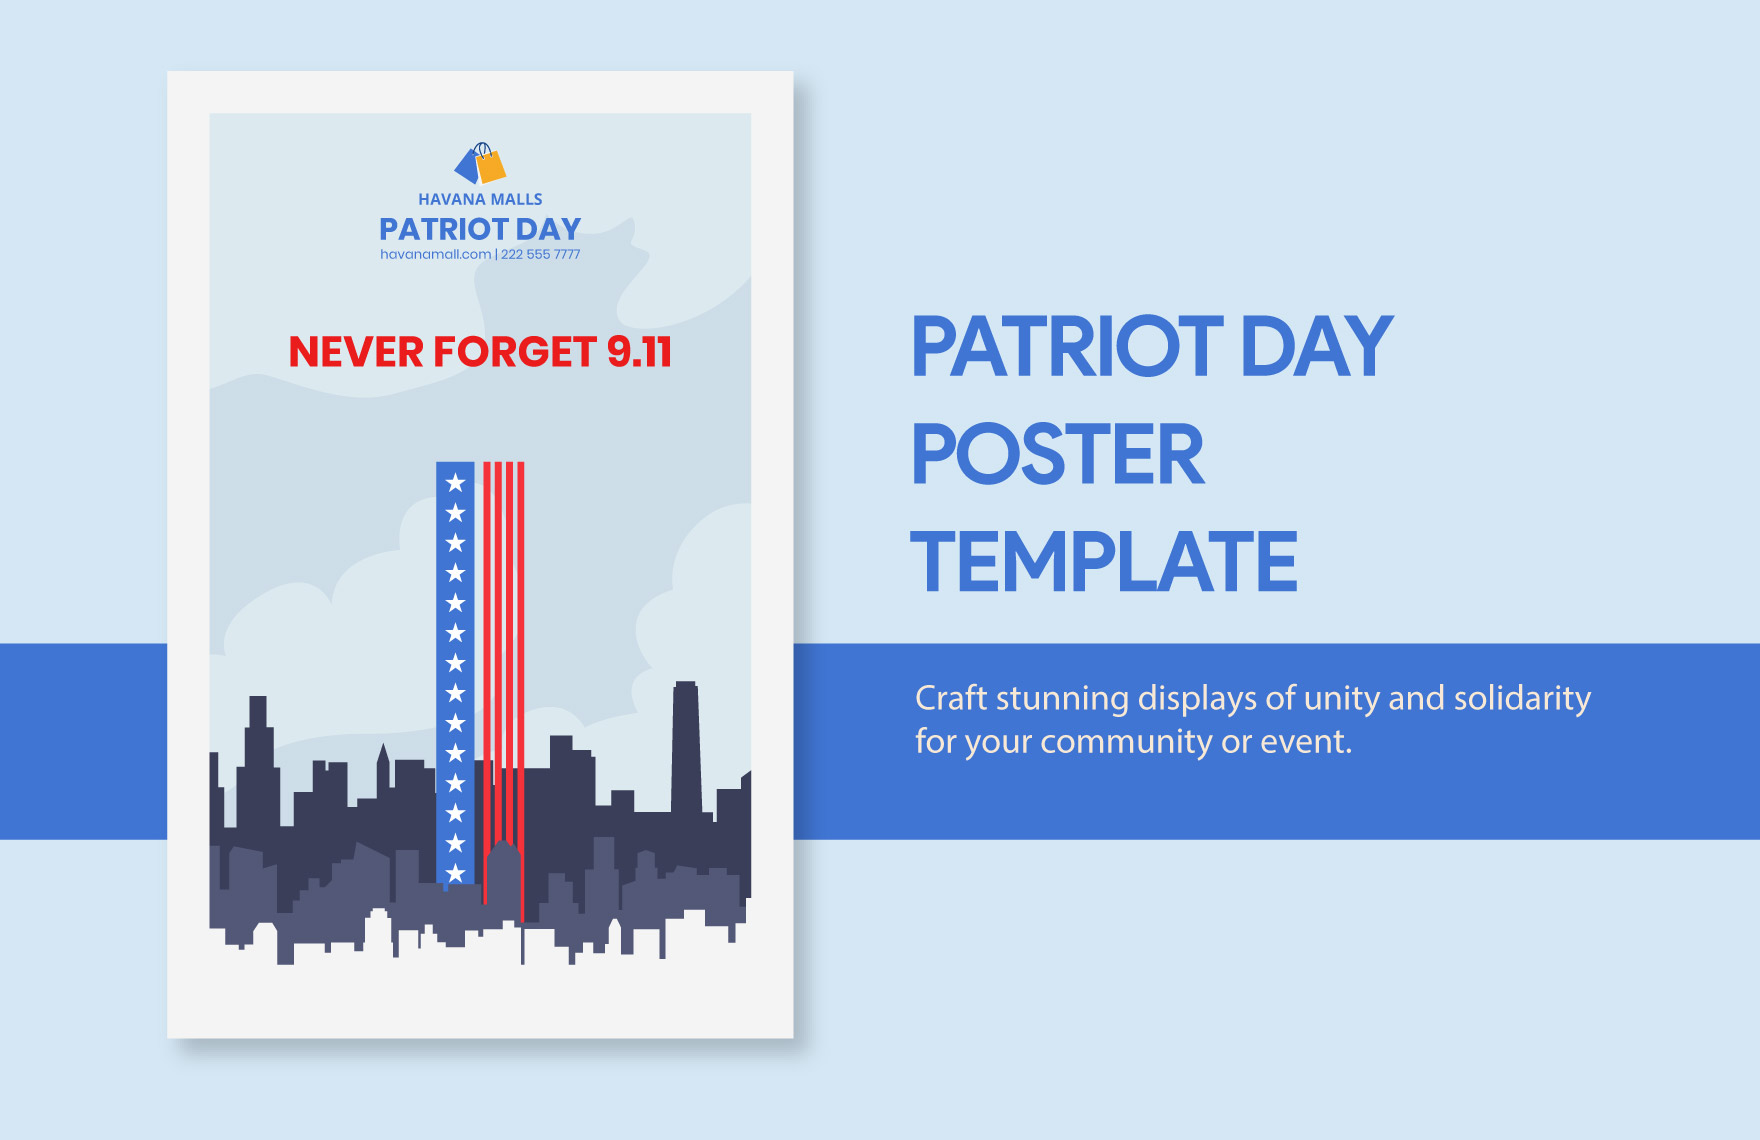 Patriot Day Poster Template